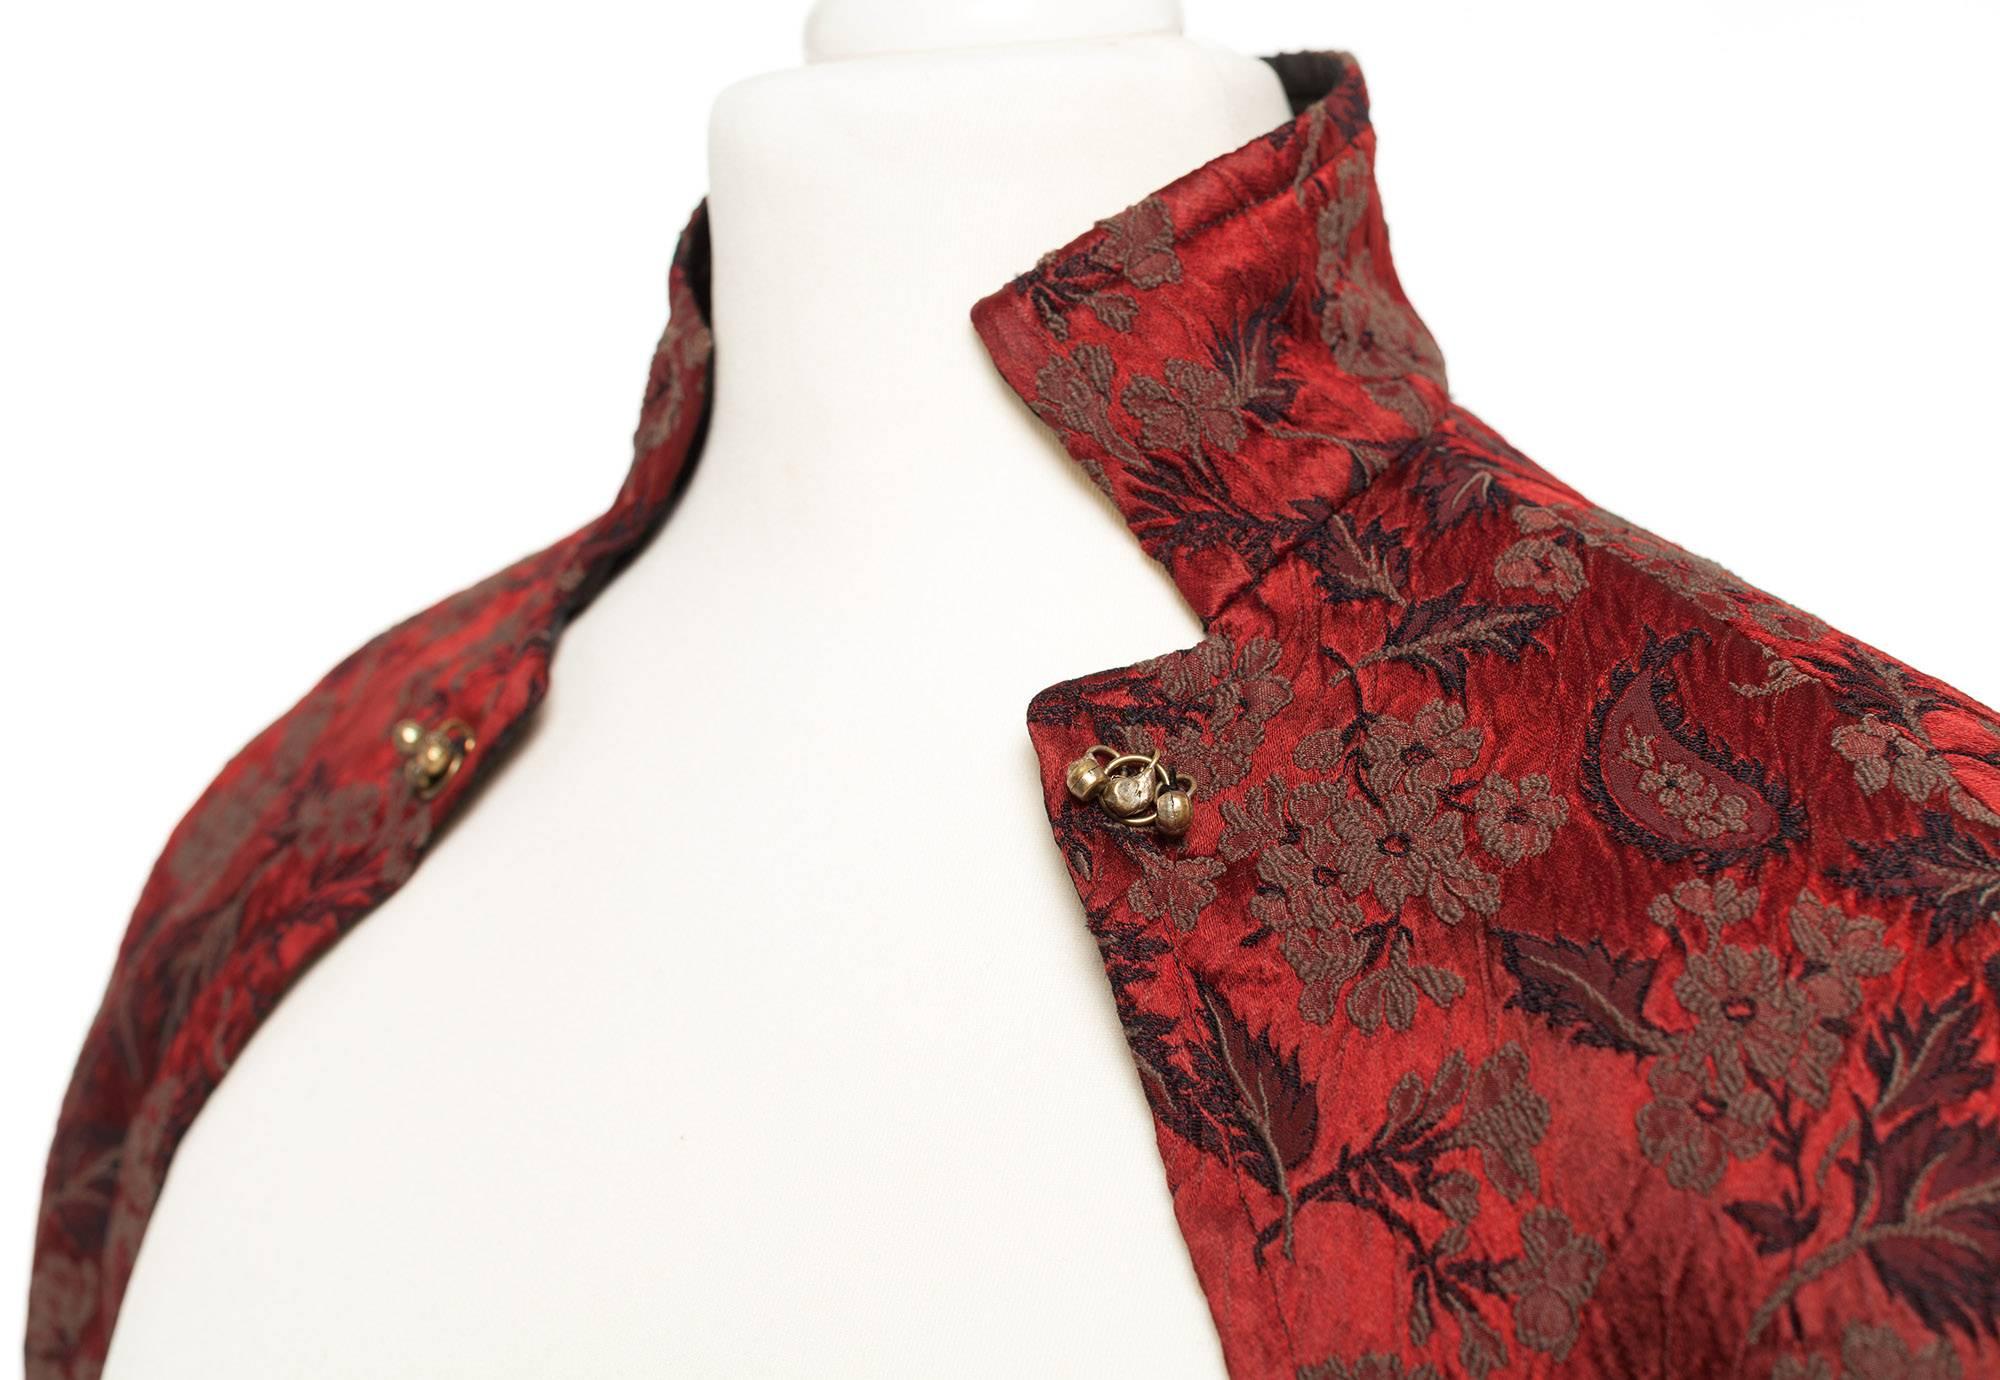 Bolero comes in a rich Bordeaux Brocade, cut empire style, extra long fitted sleeves with kissing front closure. Vintage Dries Van Noten at his best.